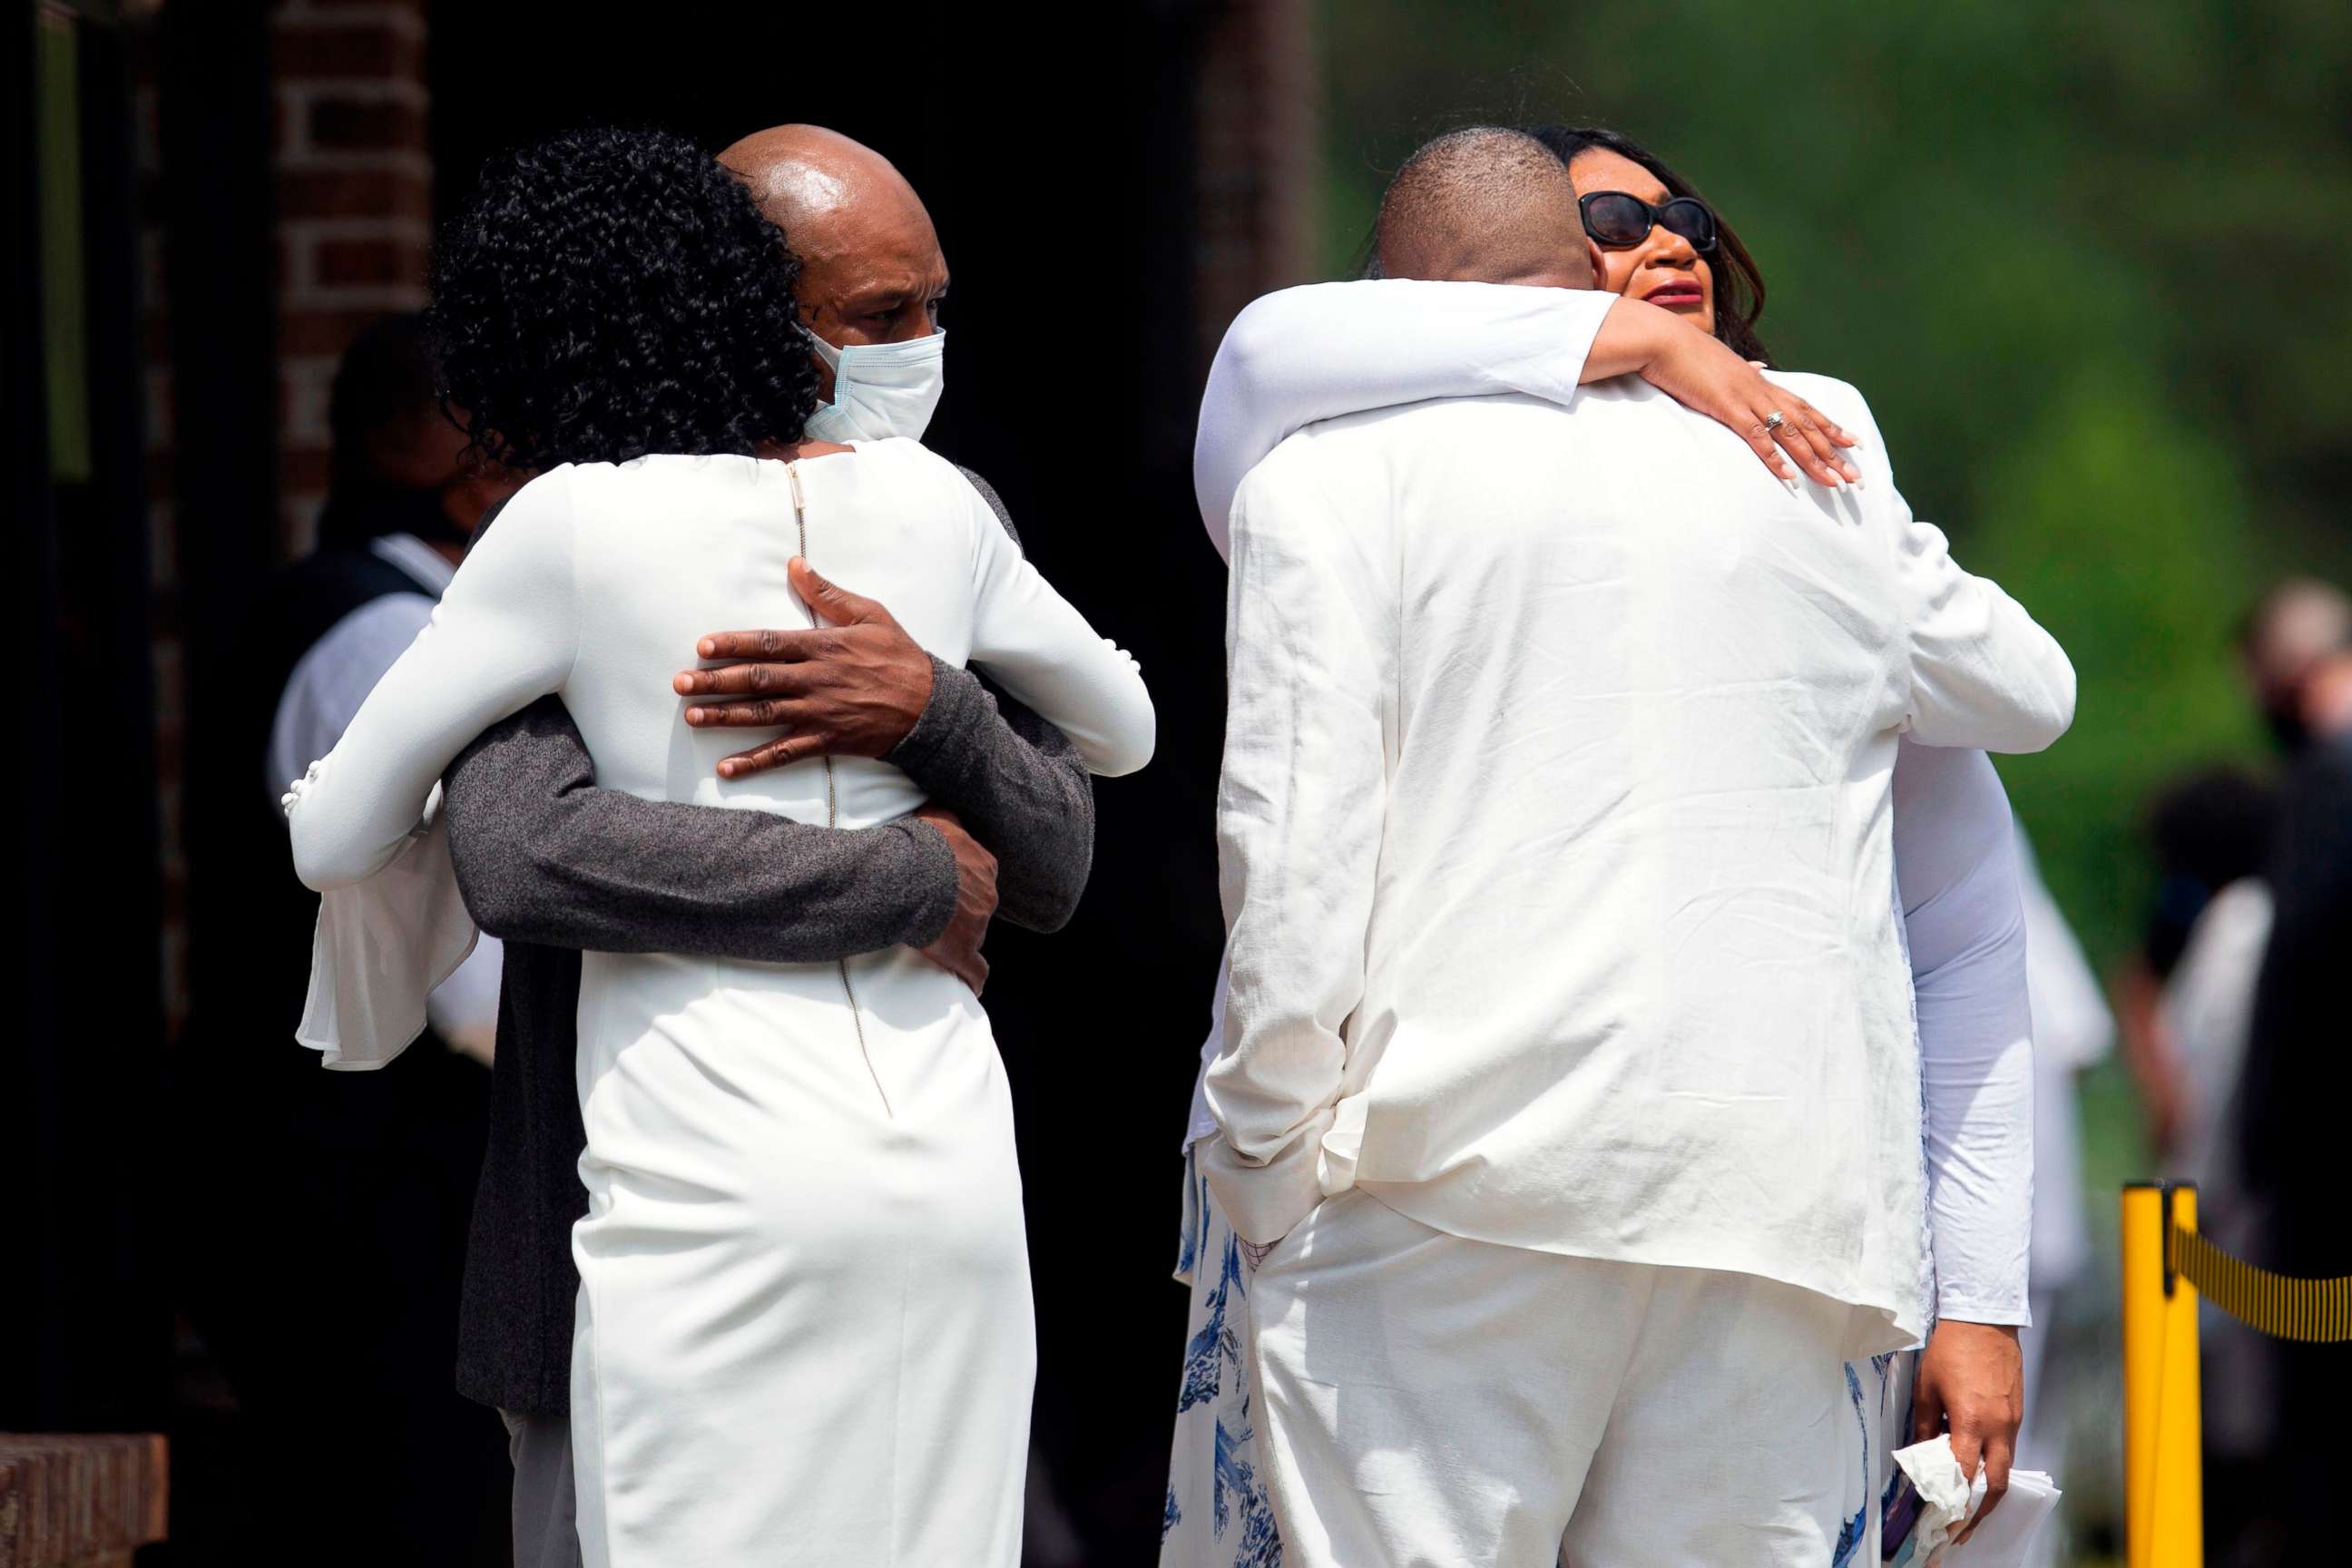 PHOTO: Zsa-Zsa, left, and LaTonya Floyd, sisters of George Floyd, are embraced by family at the private viewing and memorial service outside the Cape Fear Conference B Church in Raeford, N.C., June 6, 2020, during a memorial for George Floyd.